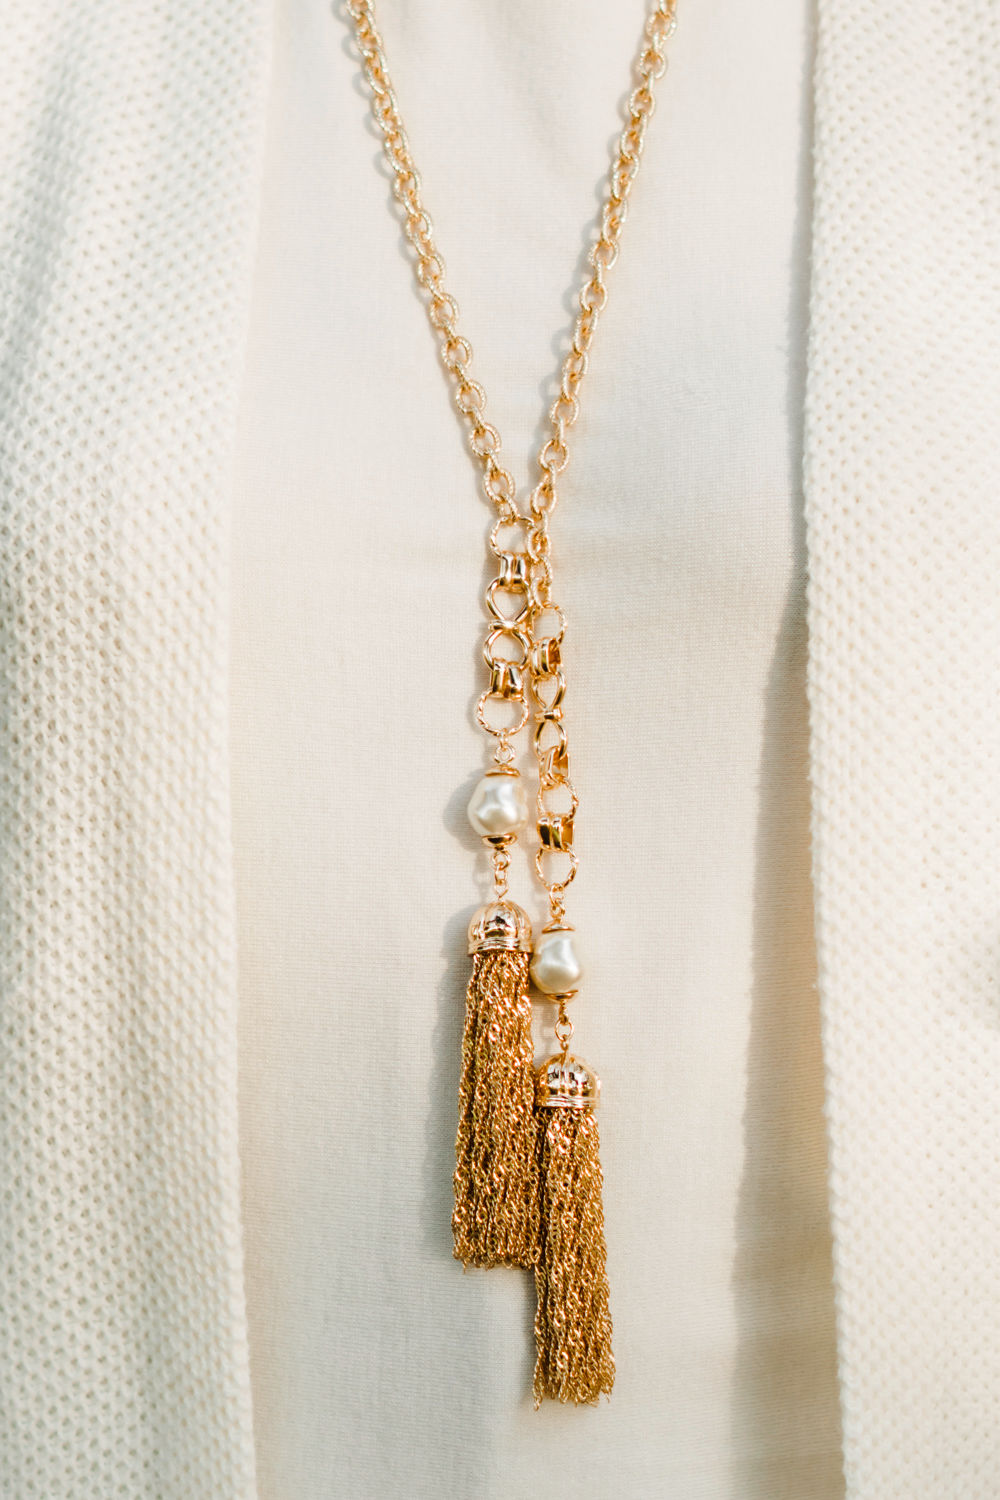 Detail: a gold and pearl tassel necklace worn by Susan B. of une femme d'un certain age.